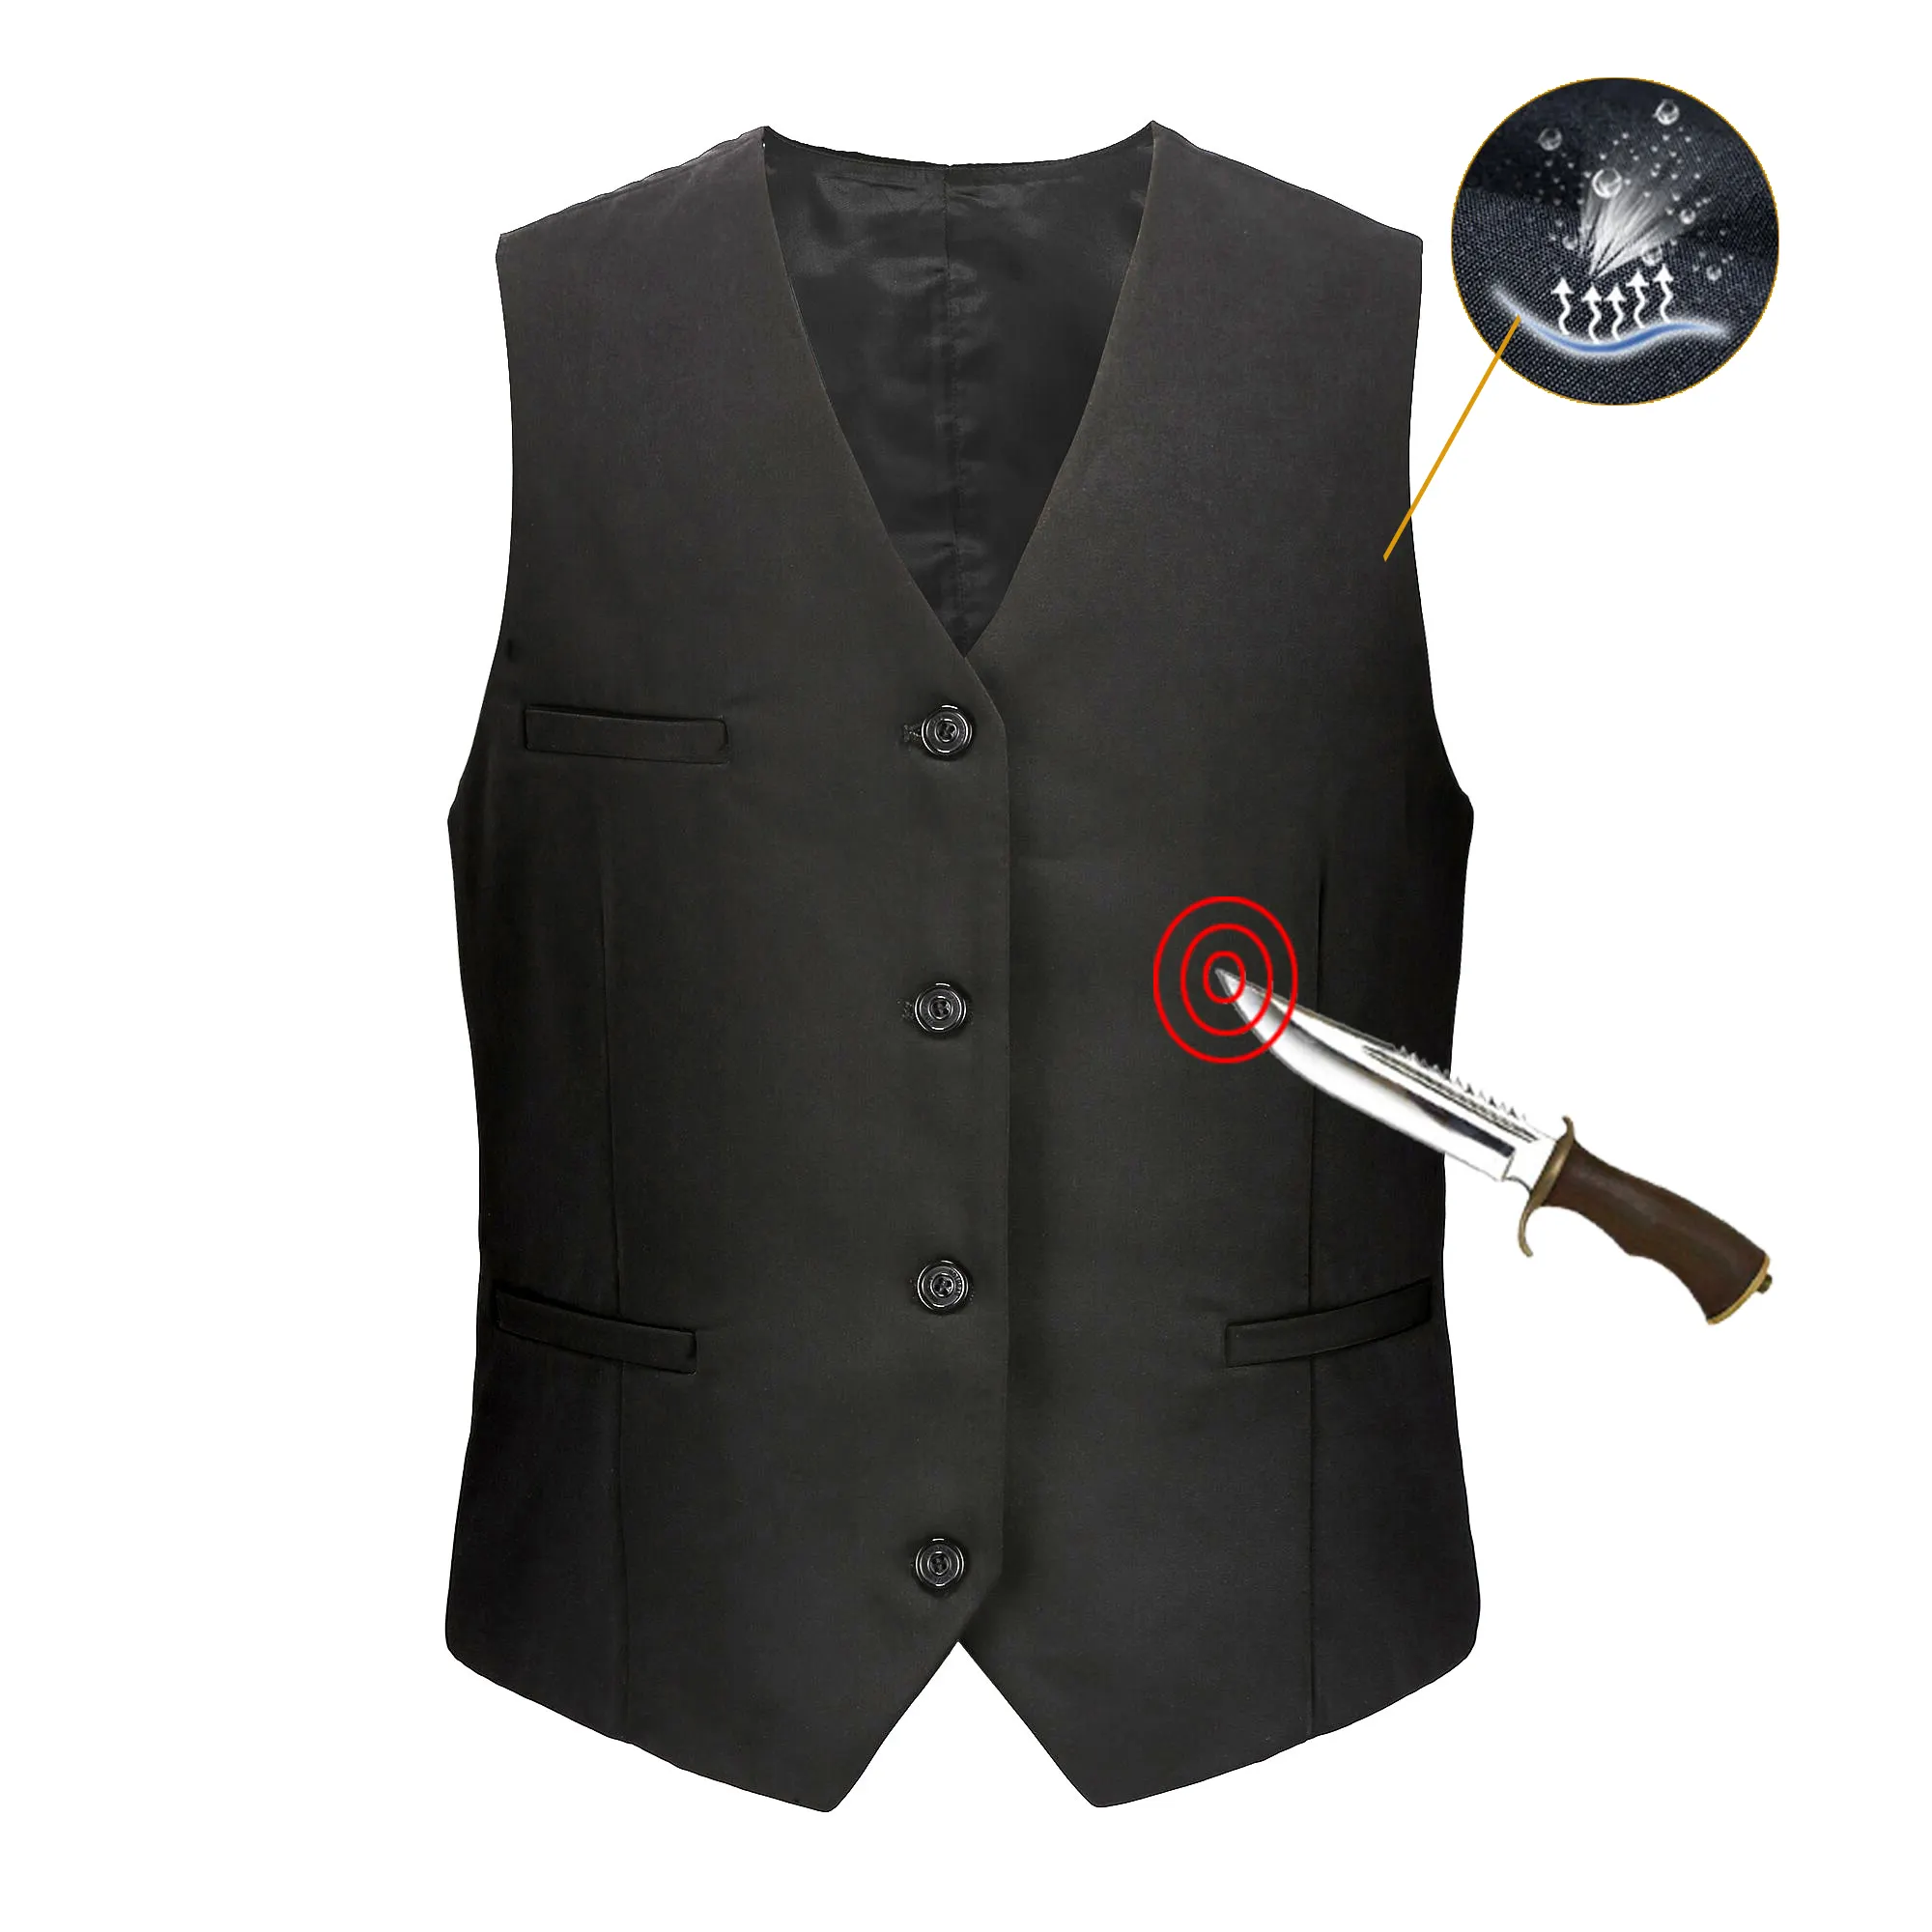 Gujia Security Protection Waistcoat Cut-Protection Clothing Waterproof Black Anti Knife Cut Stab Proof Vest for Men